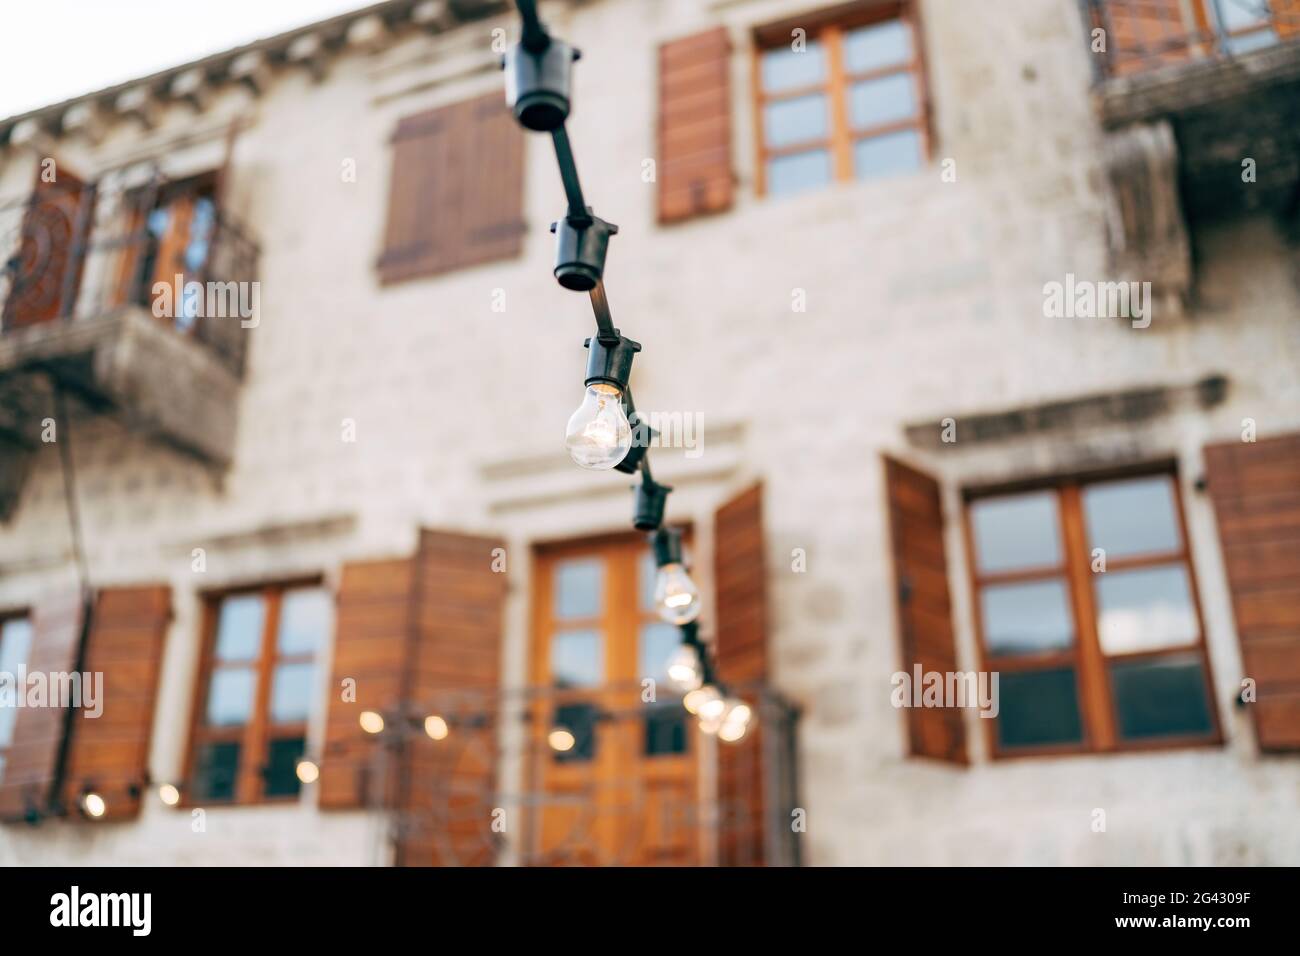 Garland of incandescent lamps against the background of the old villa. Stock Photo